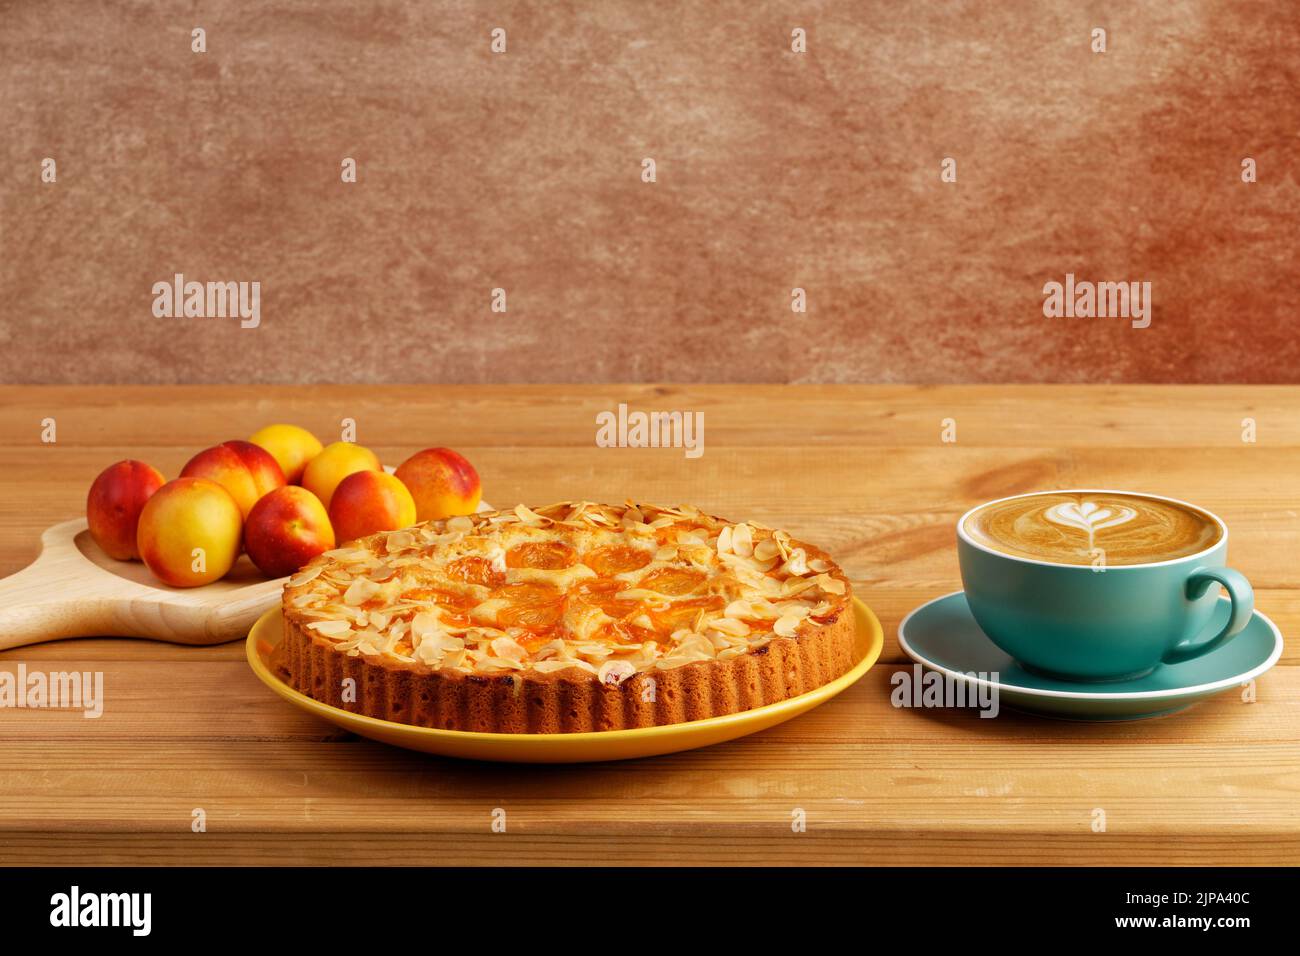 Homemade pie with apricots and cup of coffee cappuccino on wooden table. Copyspace. Stock Photo